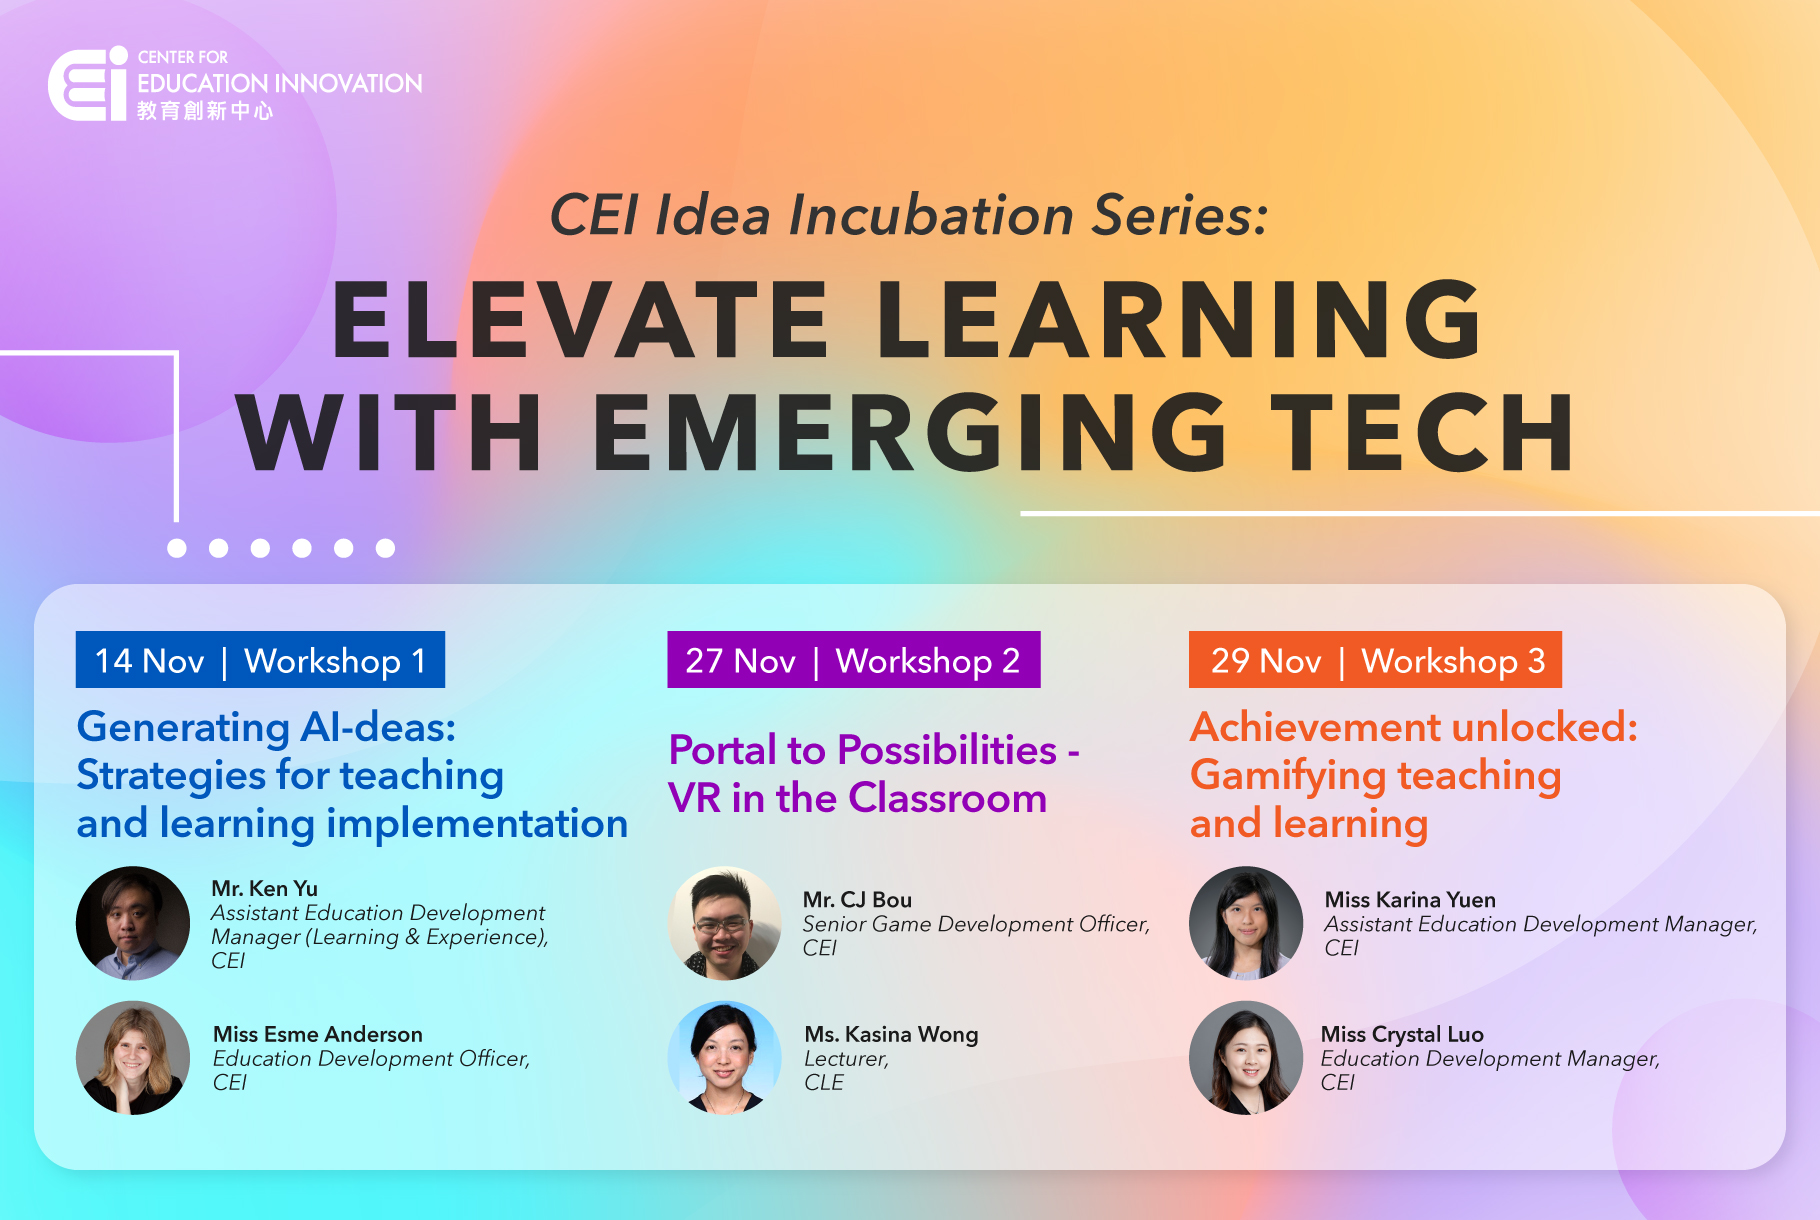 CEI Idea Incubation Series: Elevate Learning with Emerging Tech